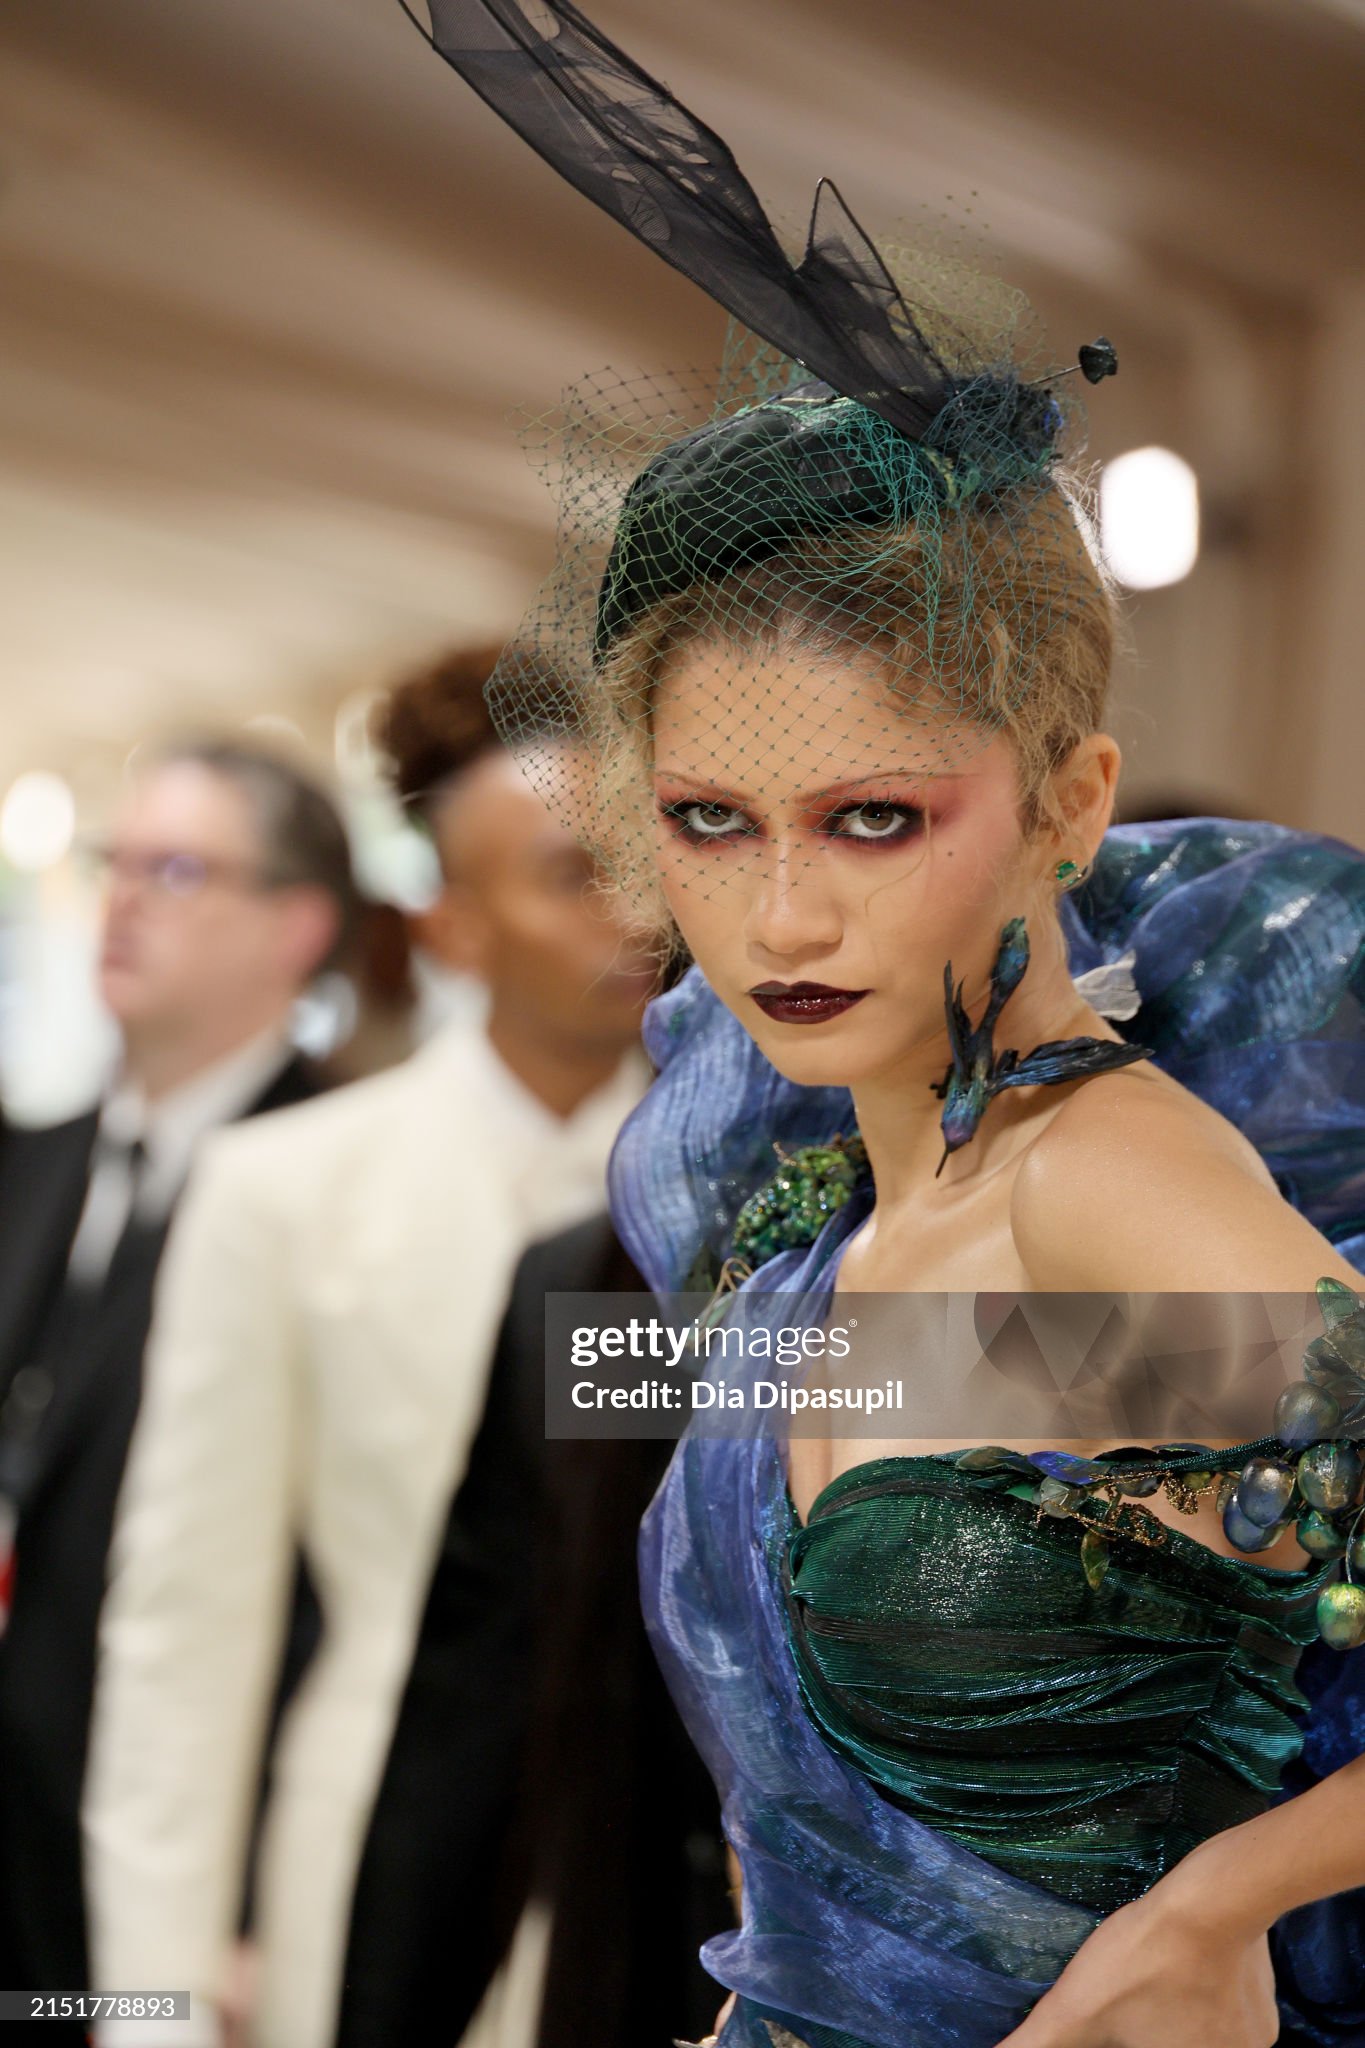 gettyimages-2151778893-2048x2048.jpg